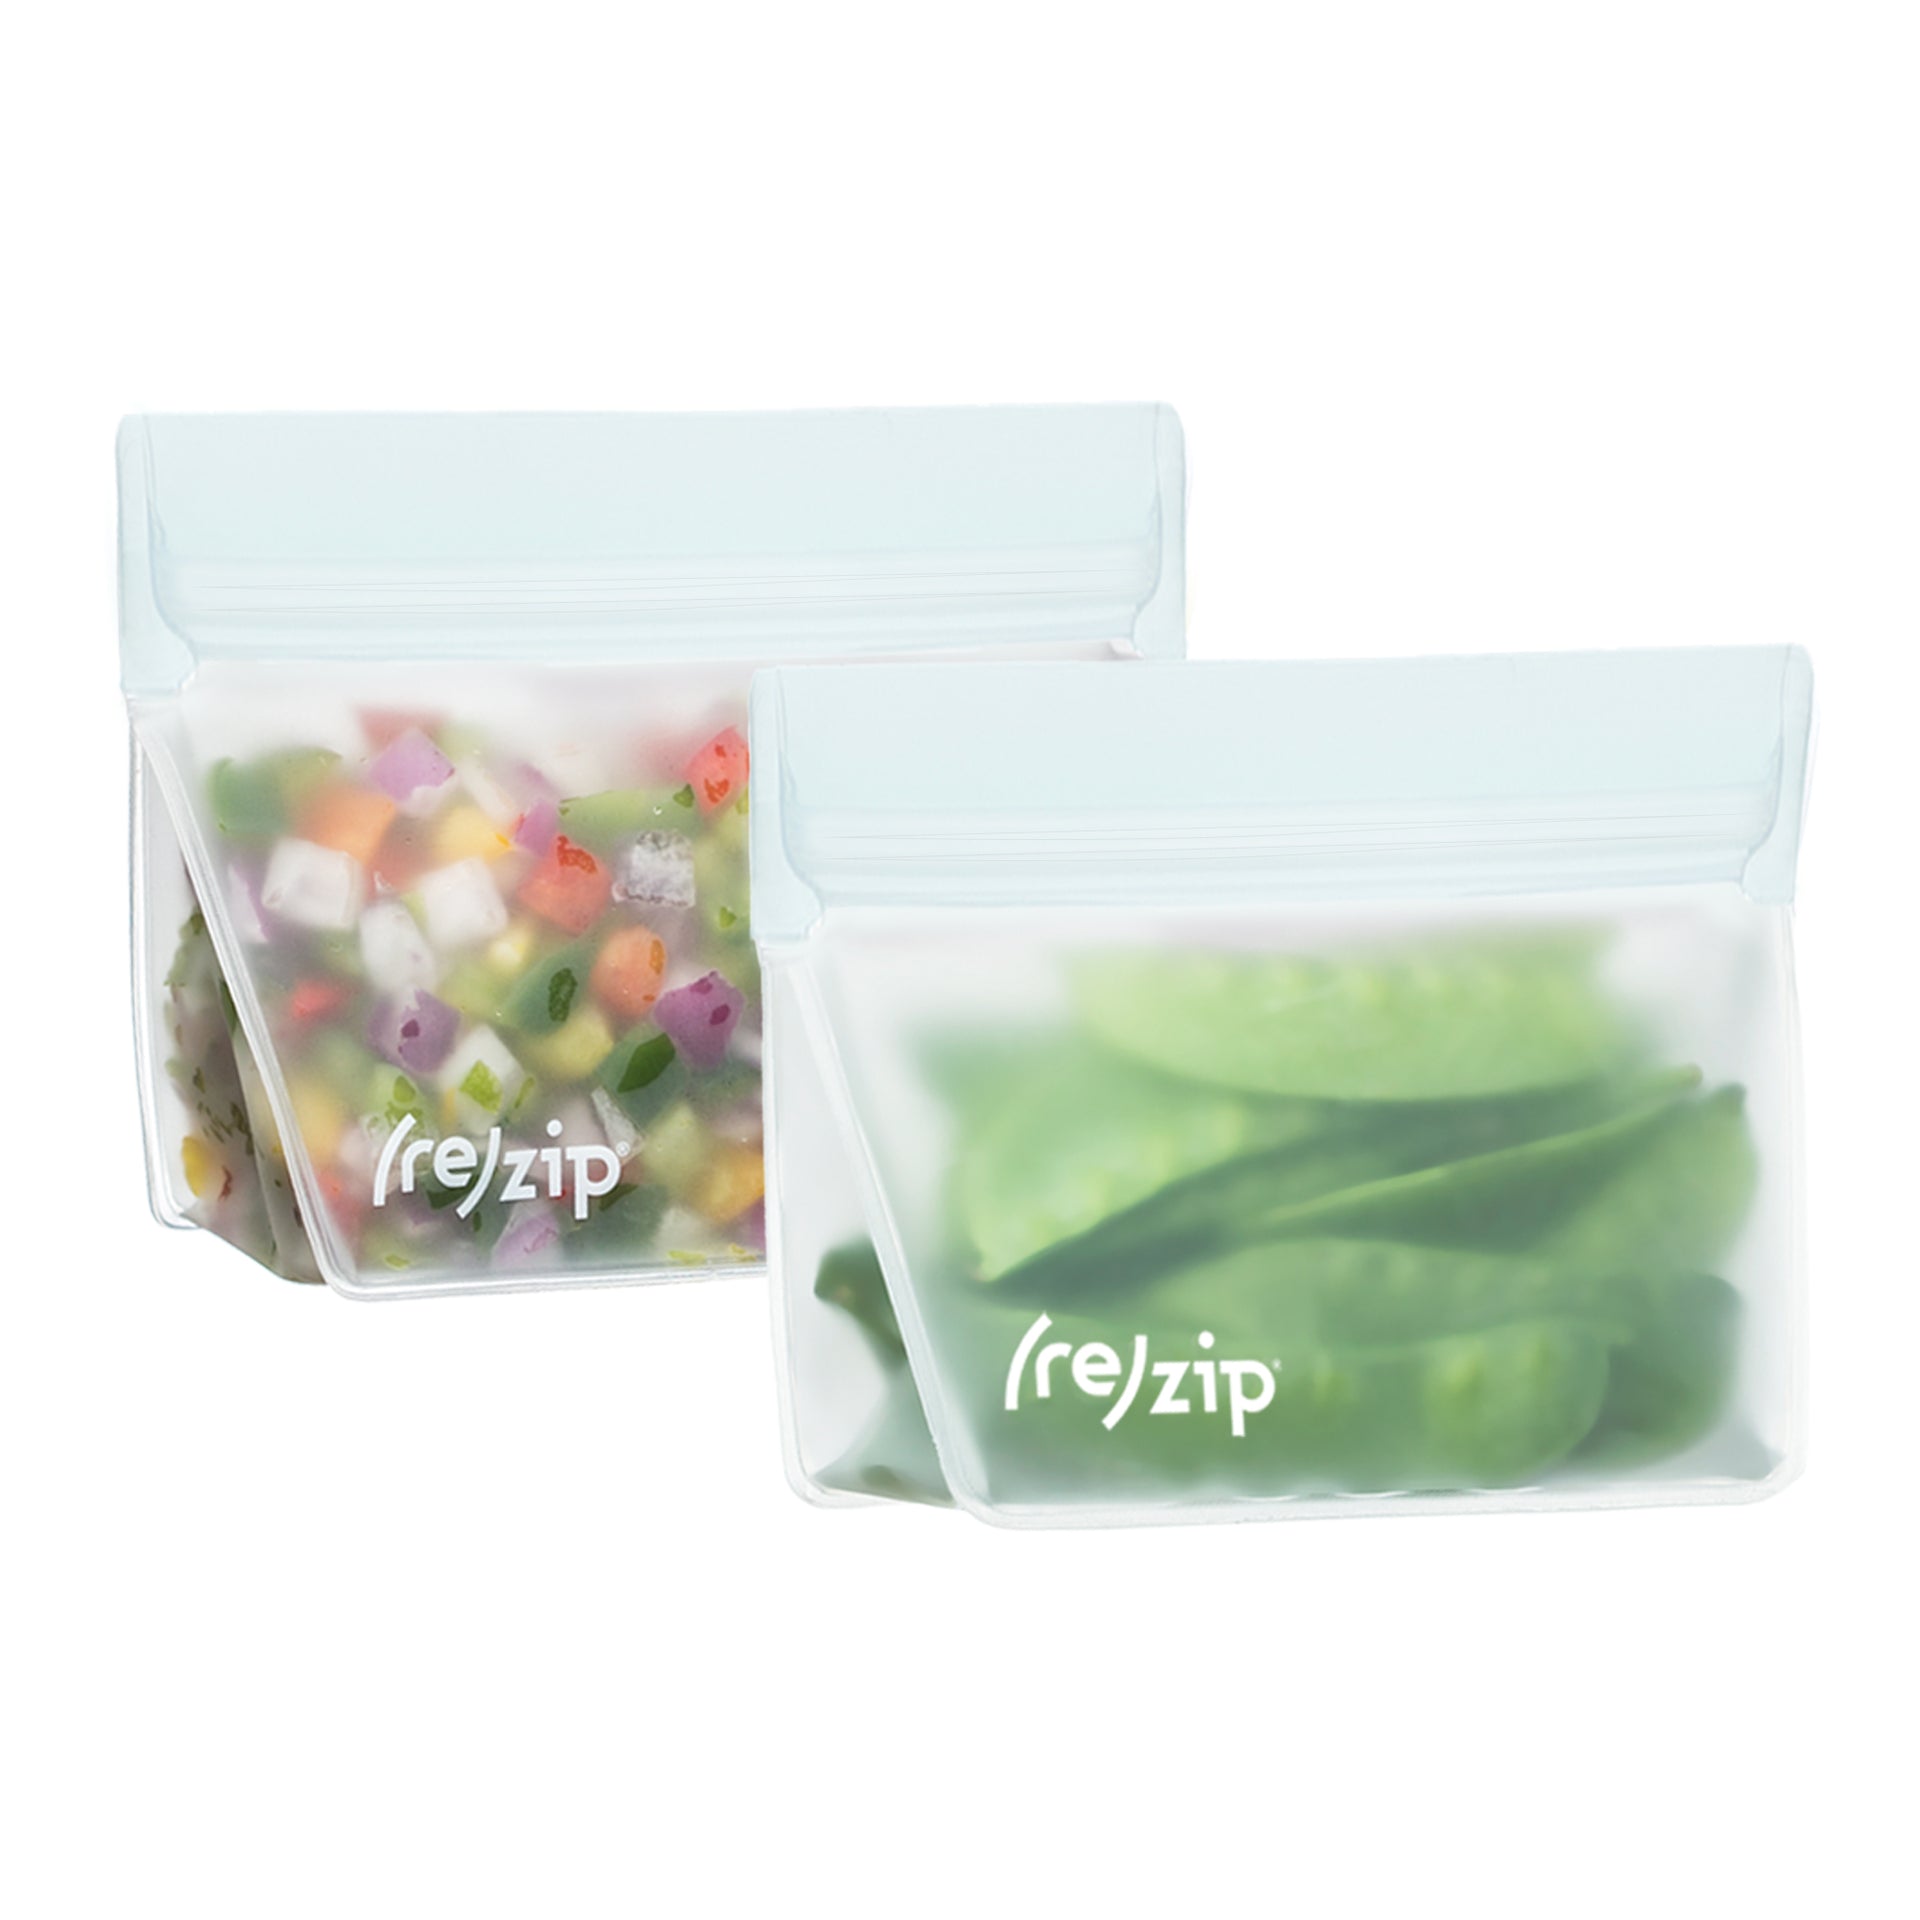 Dropship Green Reusable Food Storage Bags Stand Up - 12 Pack